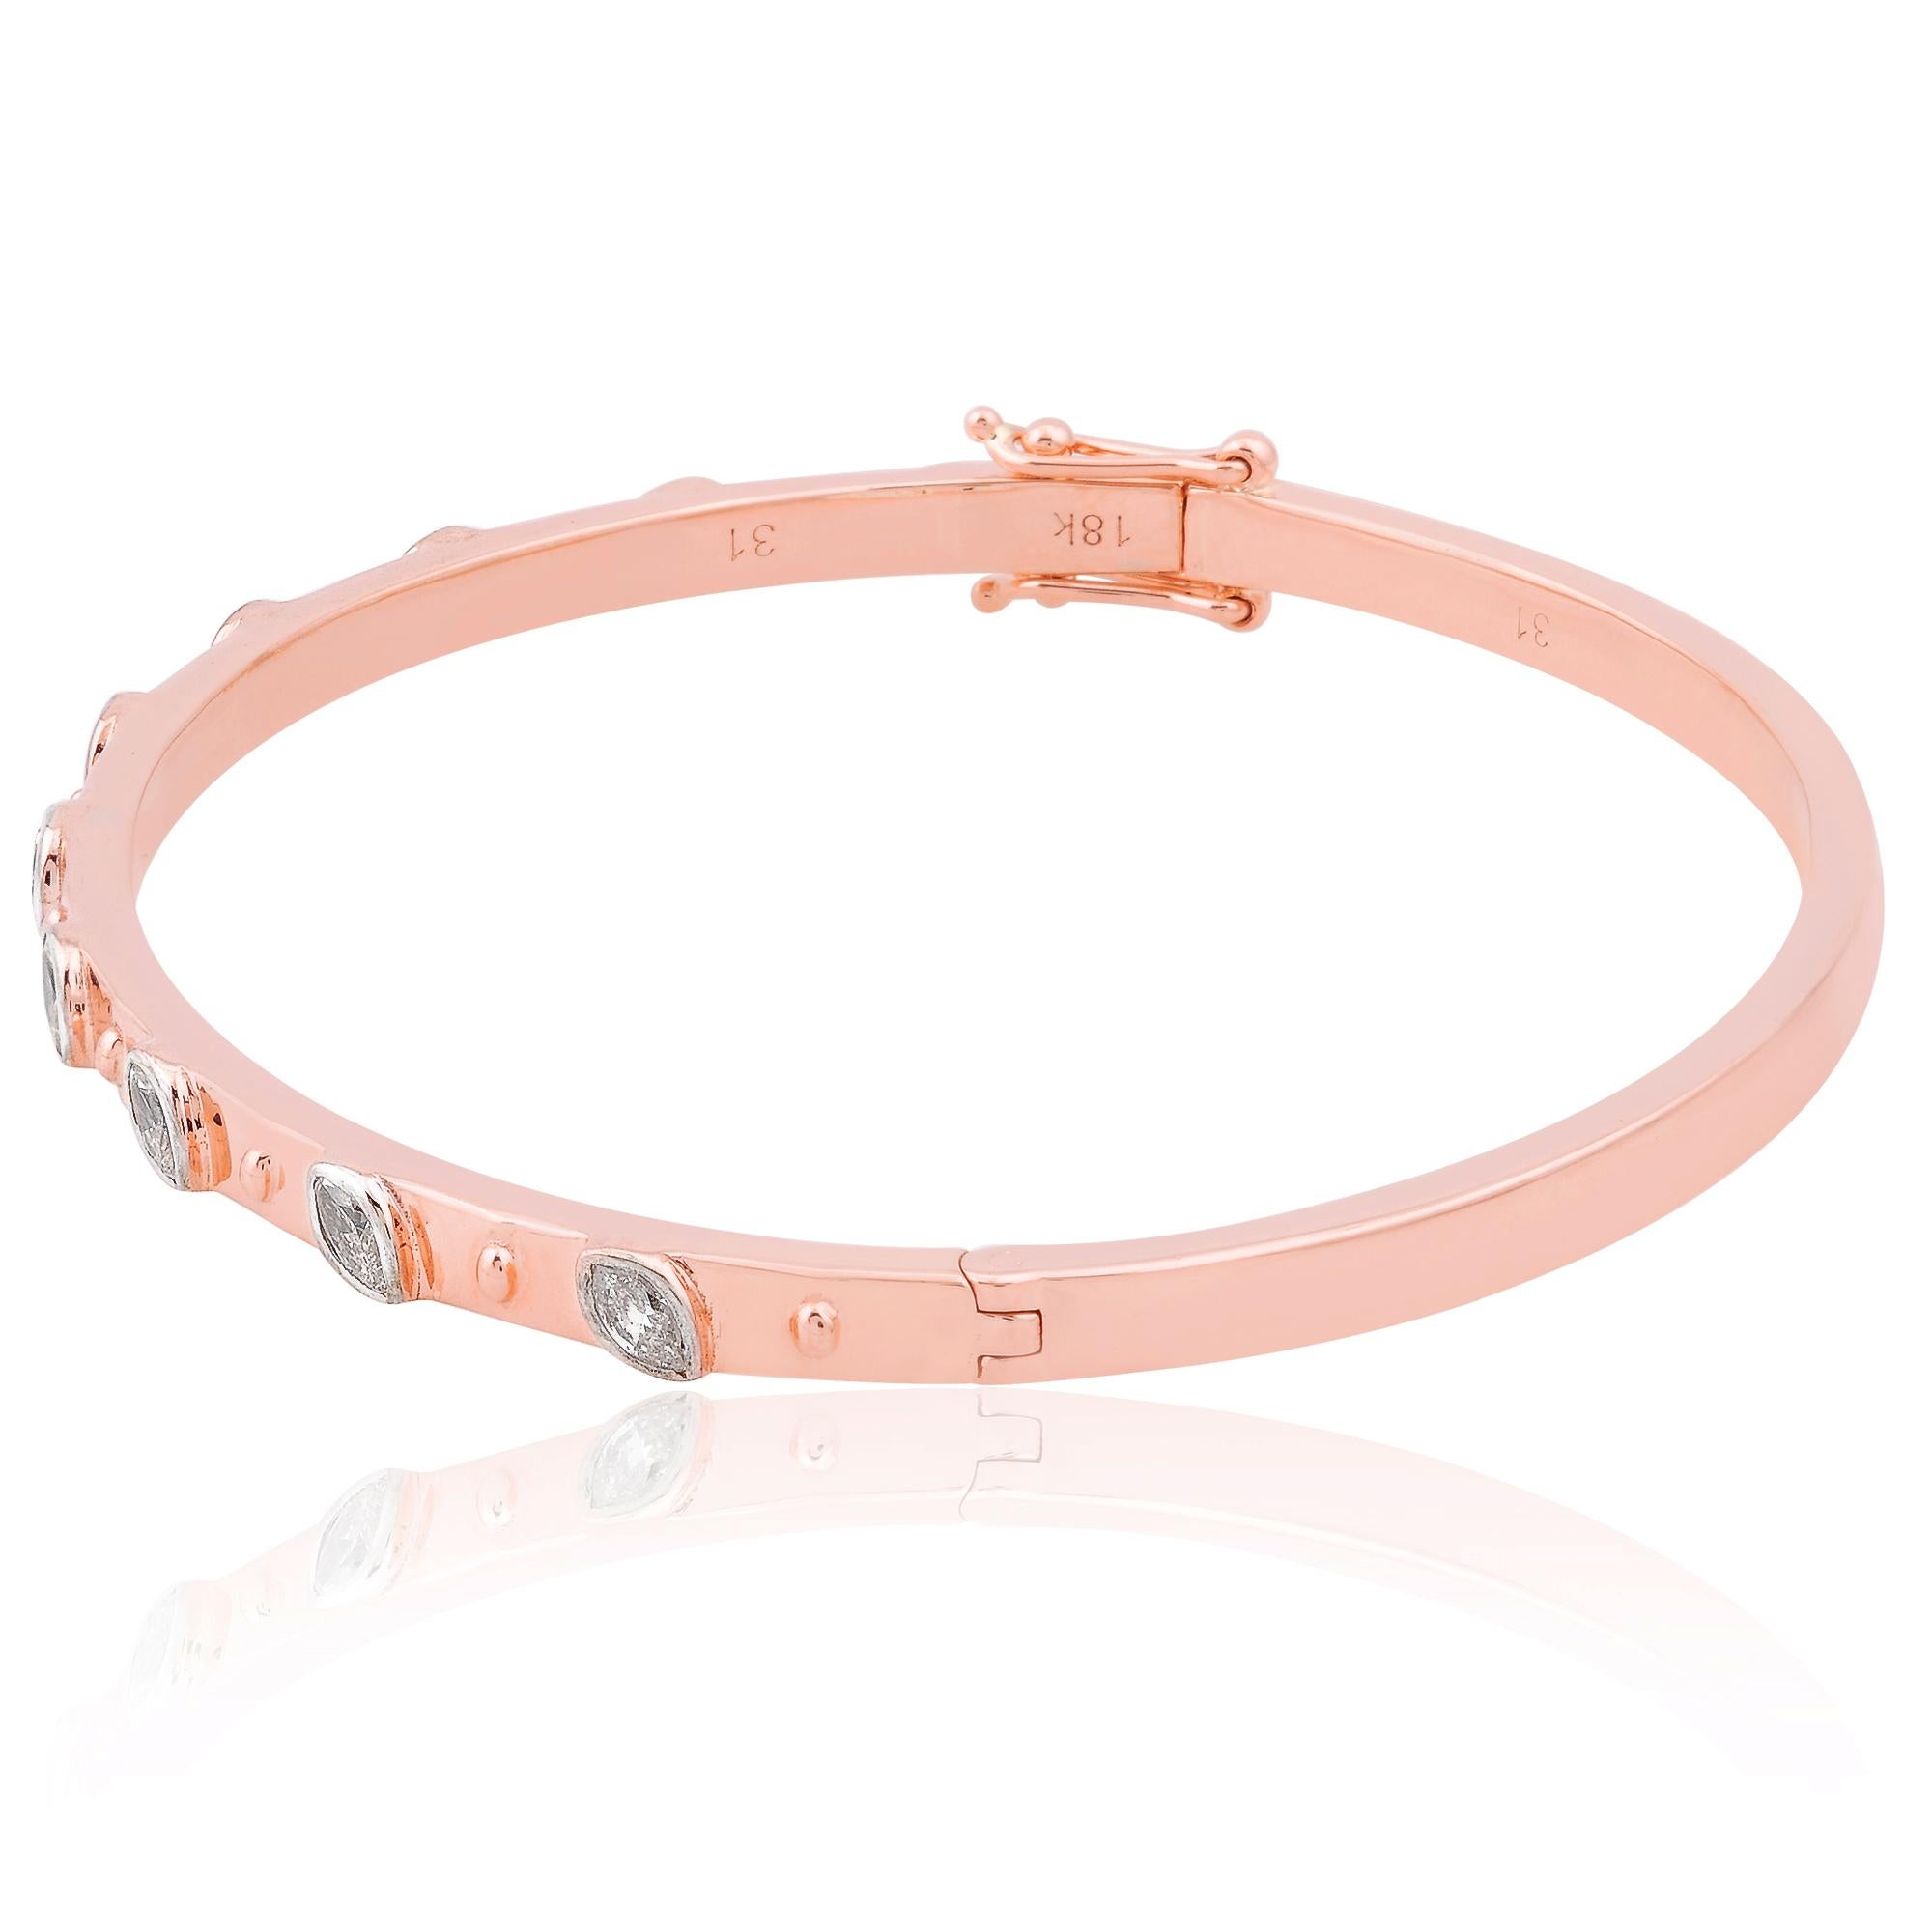 The bangle design of the bracelet adds a modern twist to its classic silhouette, with the sleek lines of the gold band elegantly complementing the brilliance of the diamonds. The open-ended design ensures a comfortable and secure fit, while also